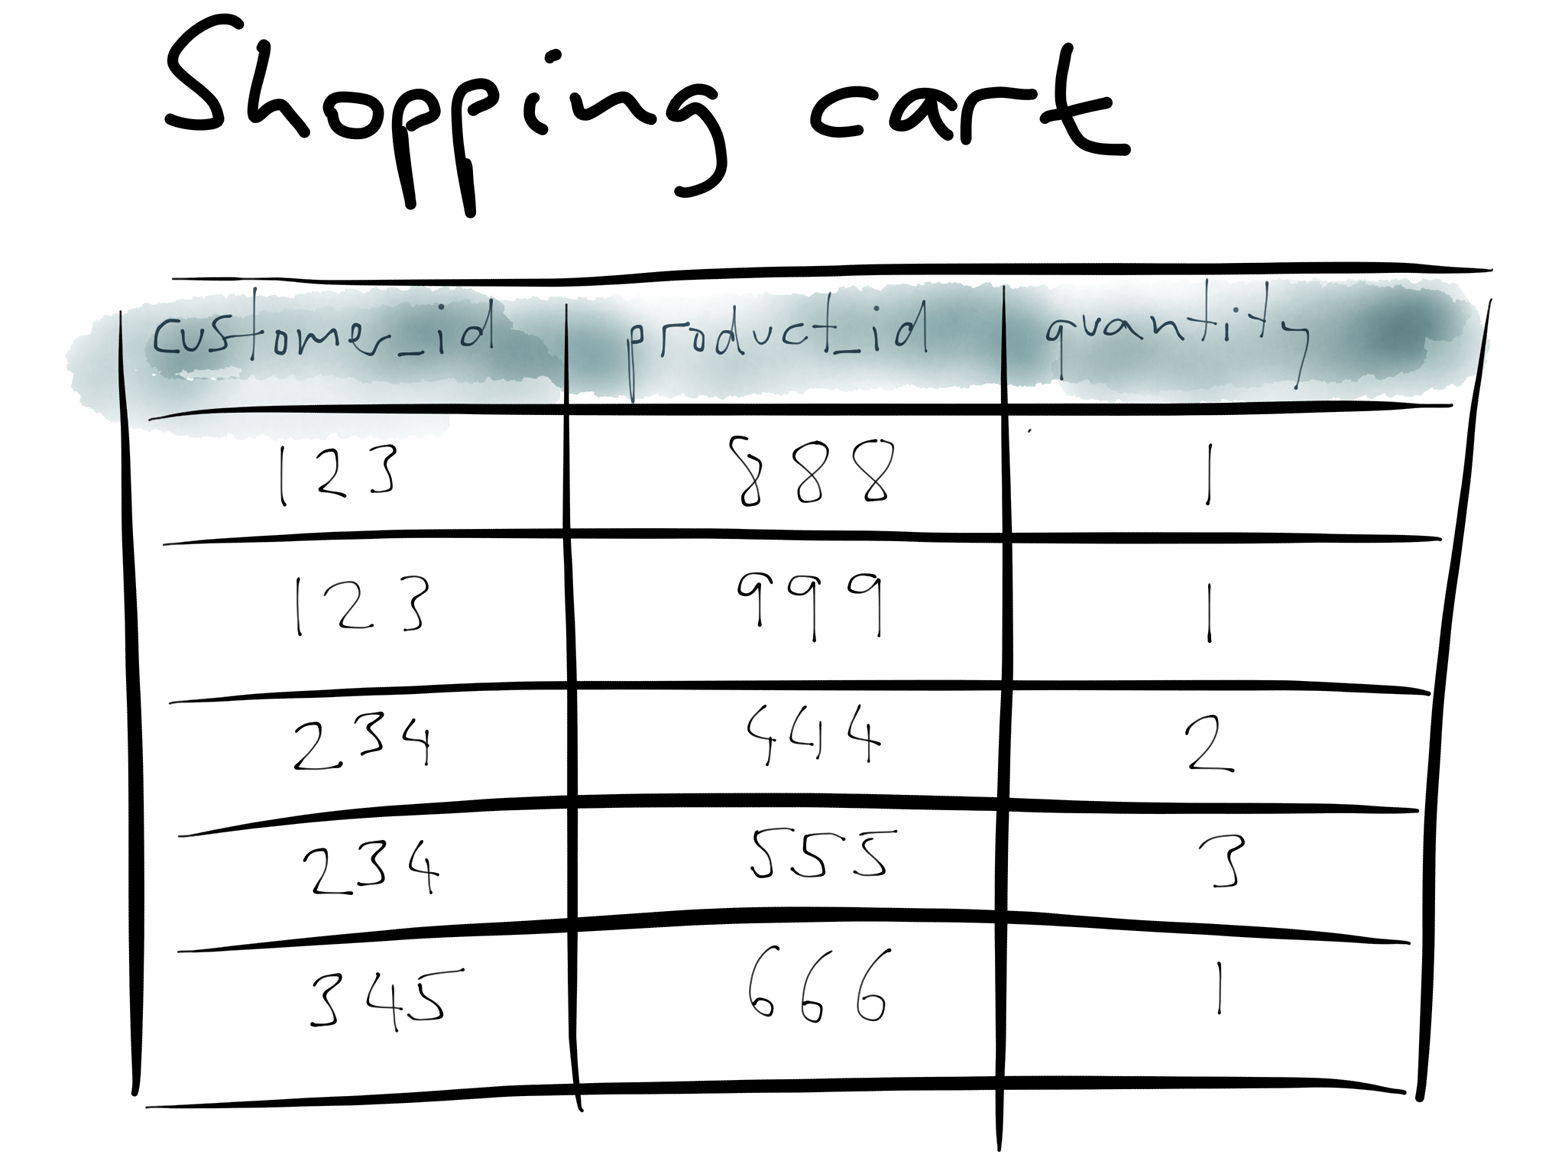 Example database: a shopping cart in a traditional relational schema.